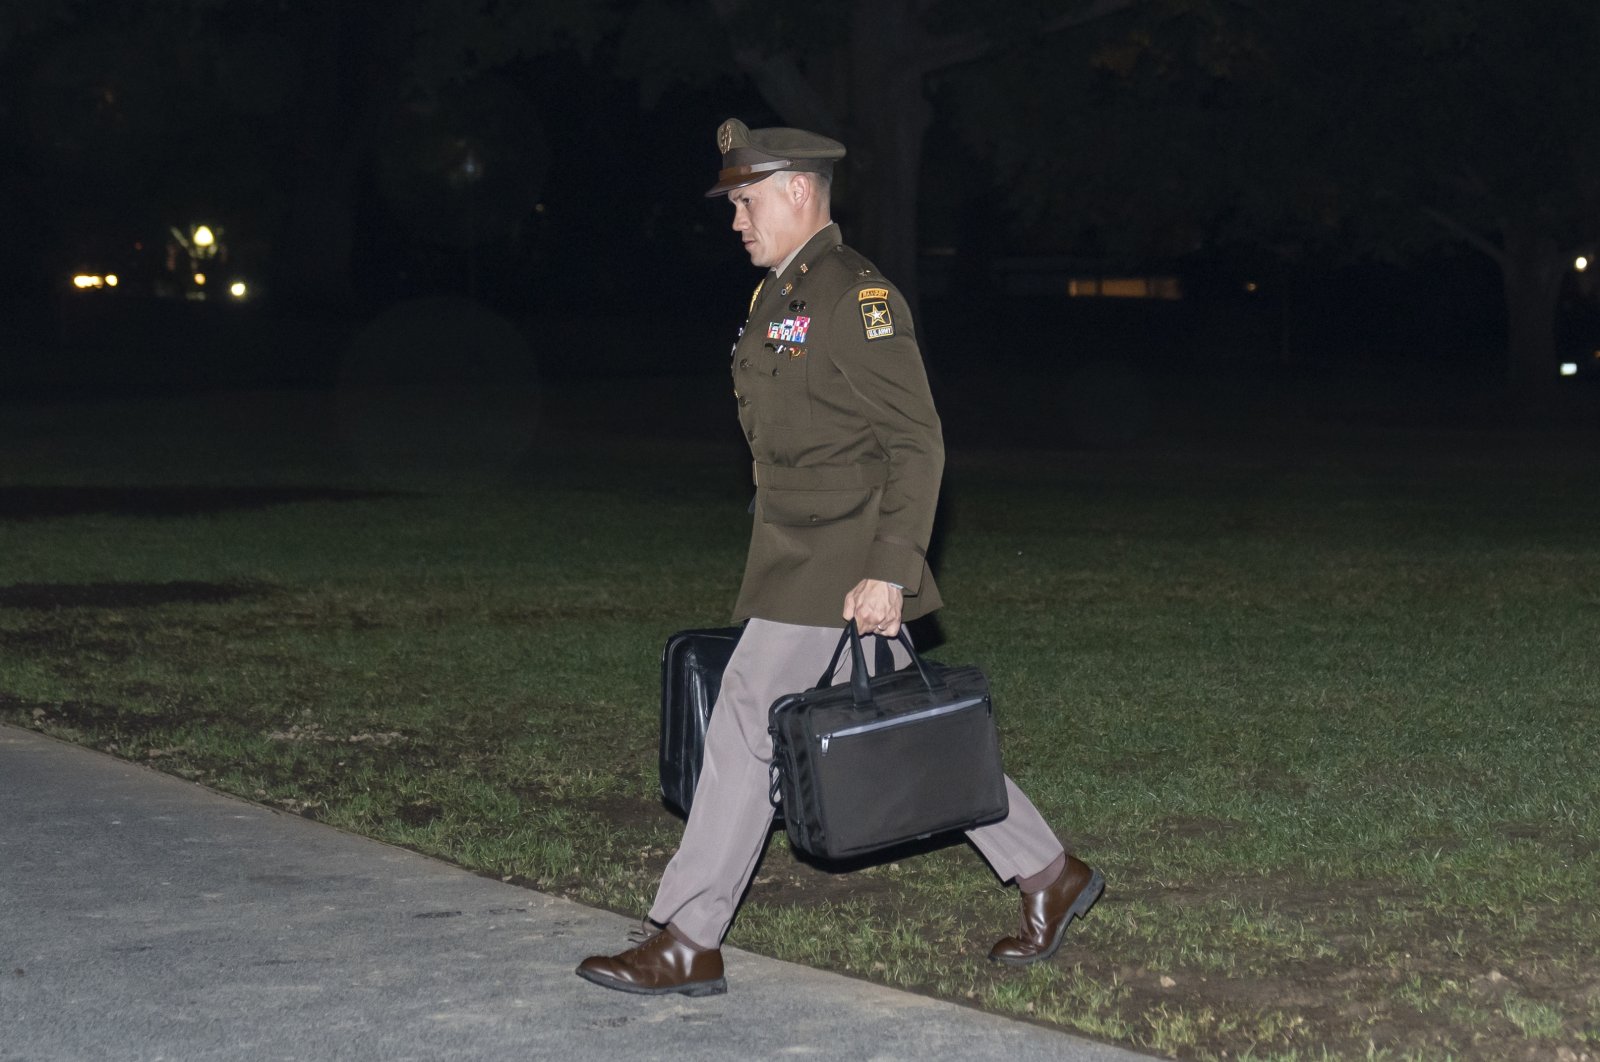 A U.S. Army officer military aide carries the nuclear launch codes known as the &quot;football,&quot; as he follows President Joe Biden into the White House after arriving on Marine One, Washington, U.S., Oct. 6, 2022. (AP Photo)